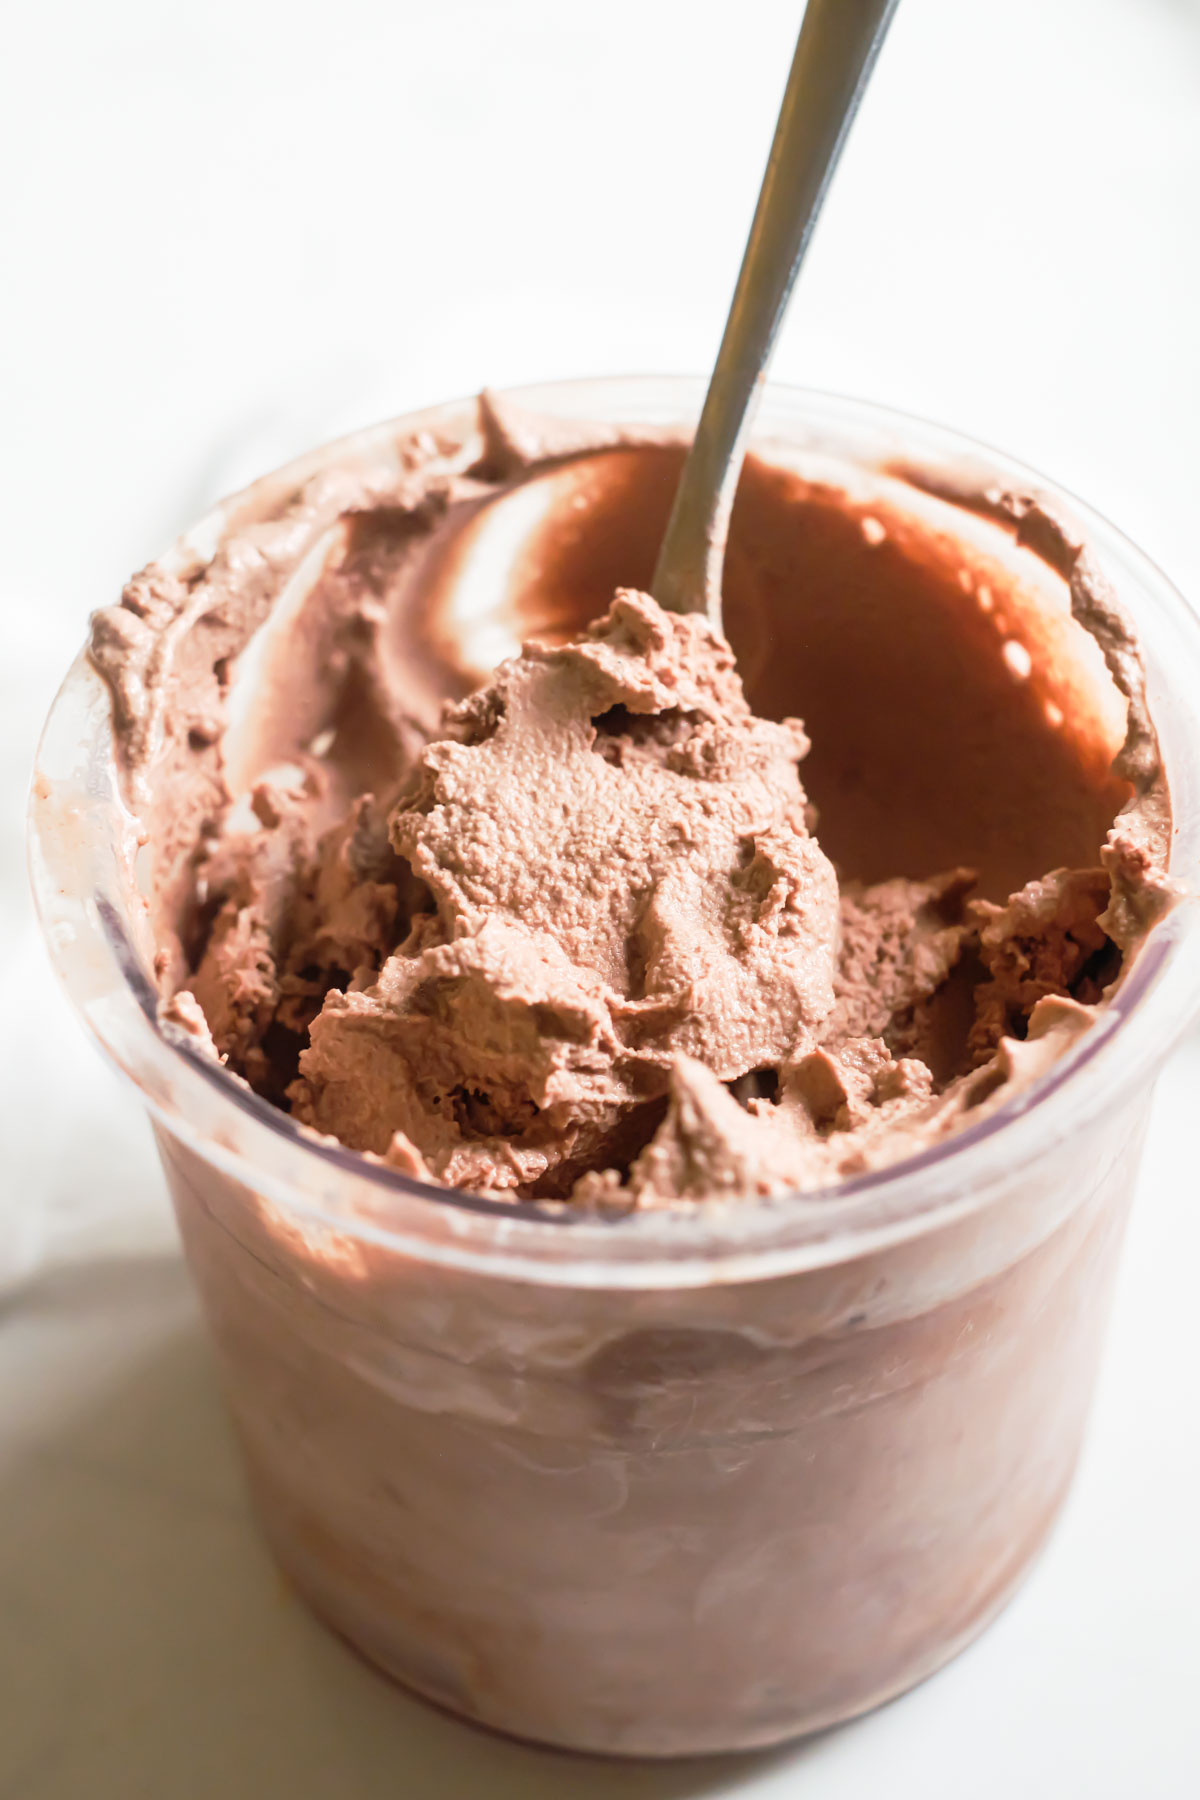 a spoon removing a portion of the finished Ninja Creami Chocolate ice cream from a glass container